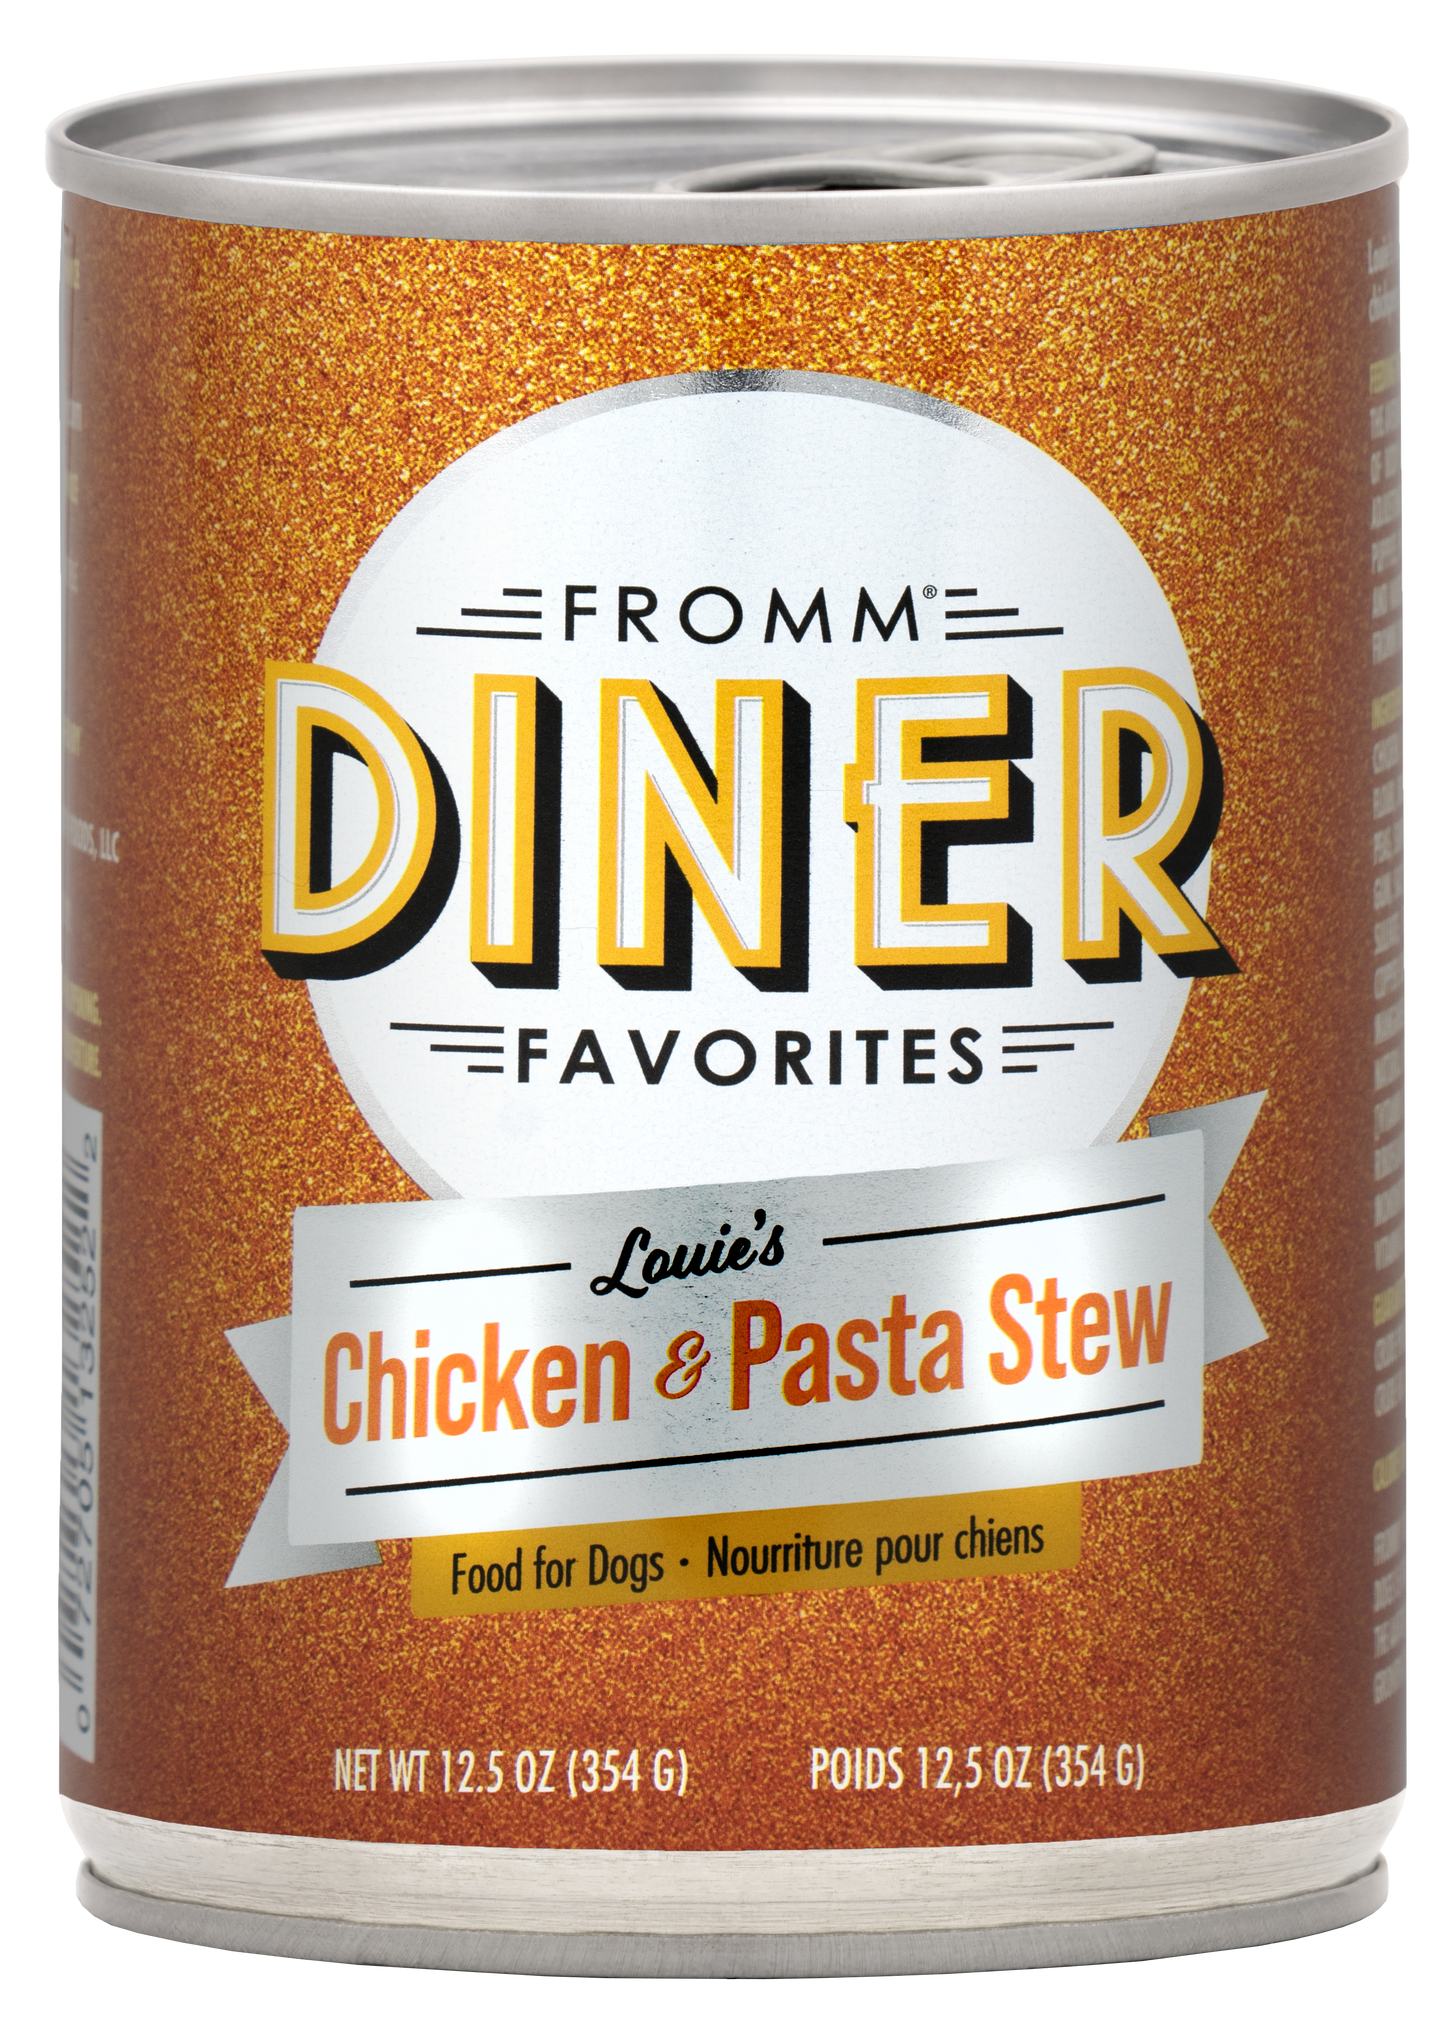 Fromm® Diner Favorites Louie's Chicken & Pasta Stew Food for Dogs 12.5 oz